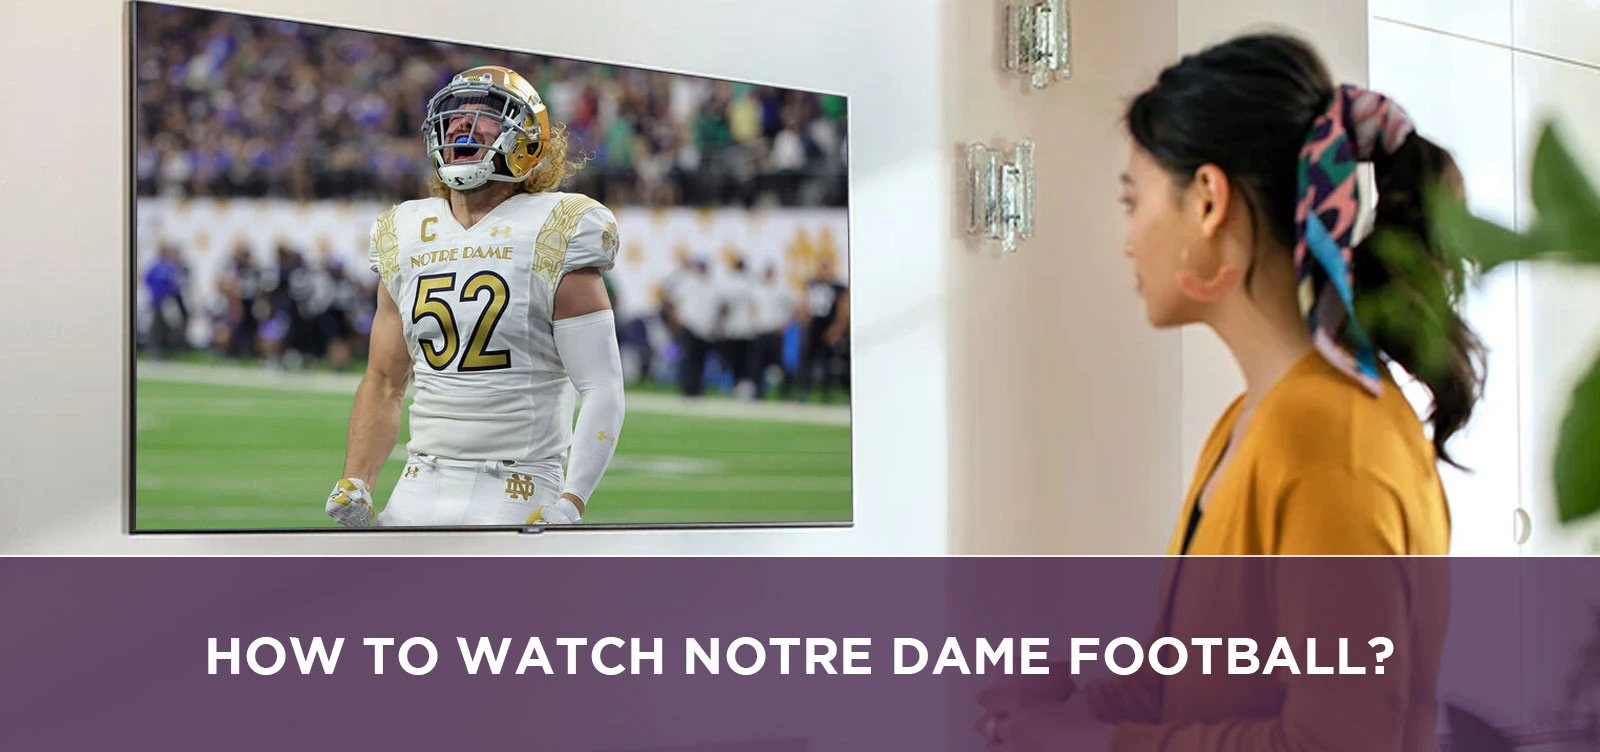 How To Watch Notre Dame Football?